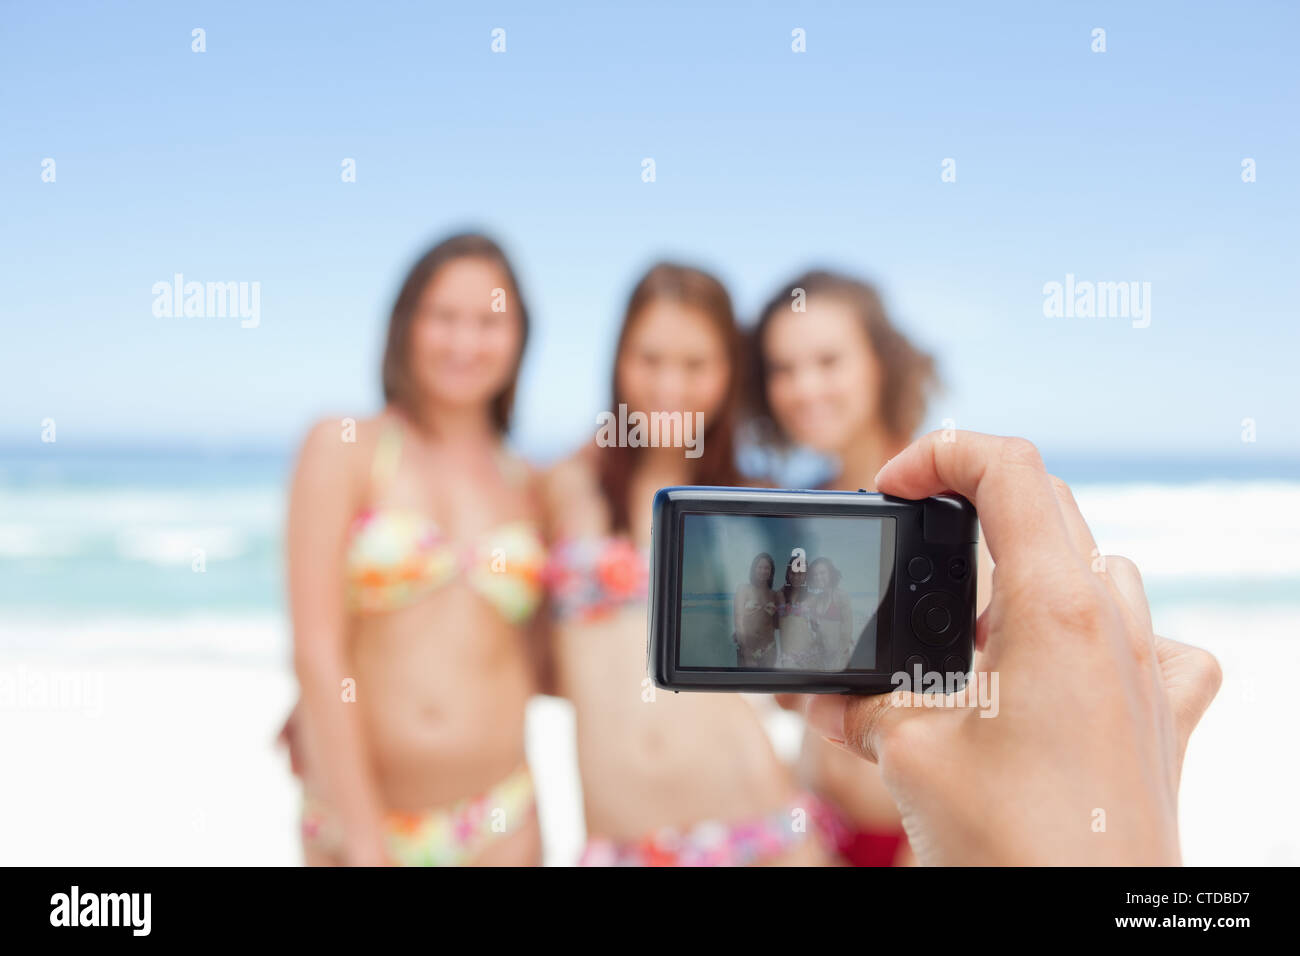 Somebody taking a photo of three friends who are posing Stock Photo